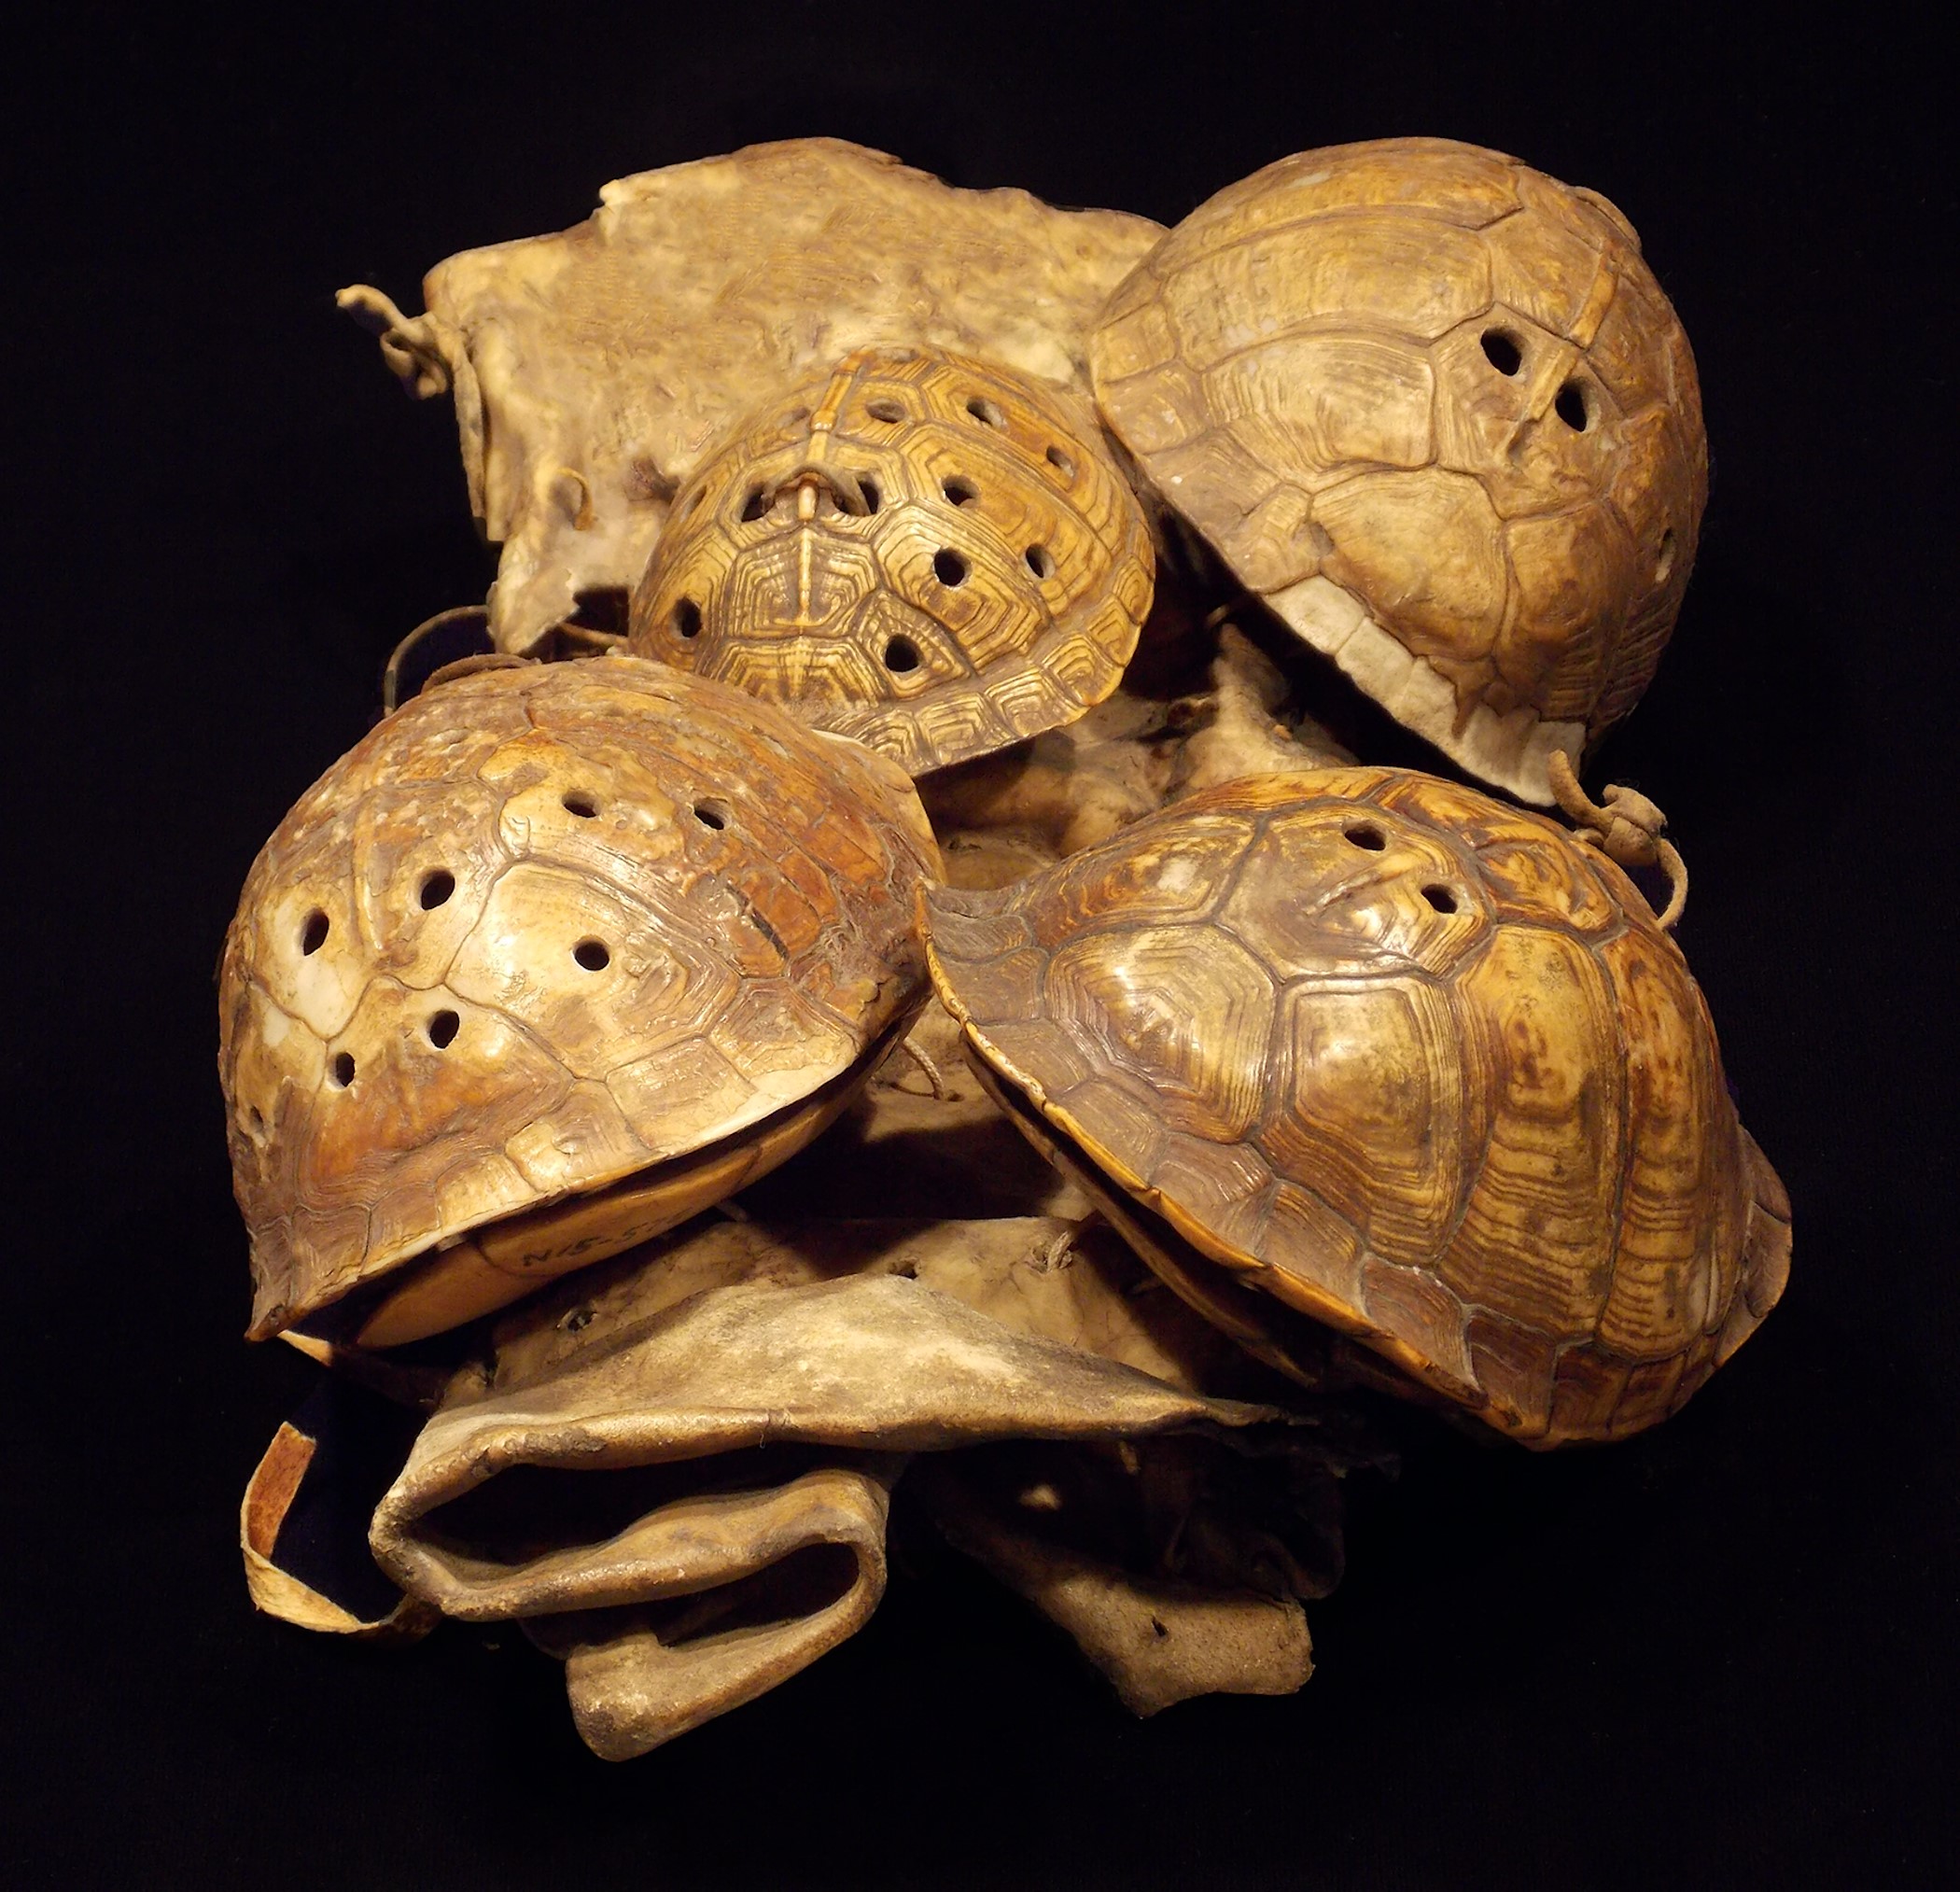 Keeping the beat: Turtle shells served as symbolic musical instruments for  indigenous cultures